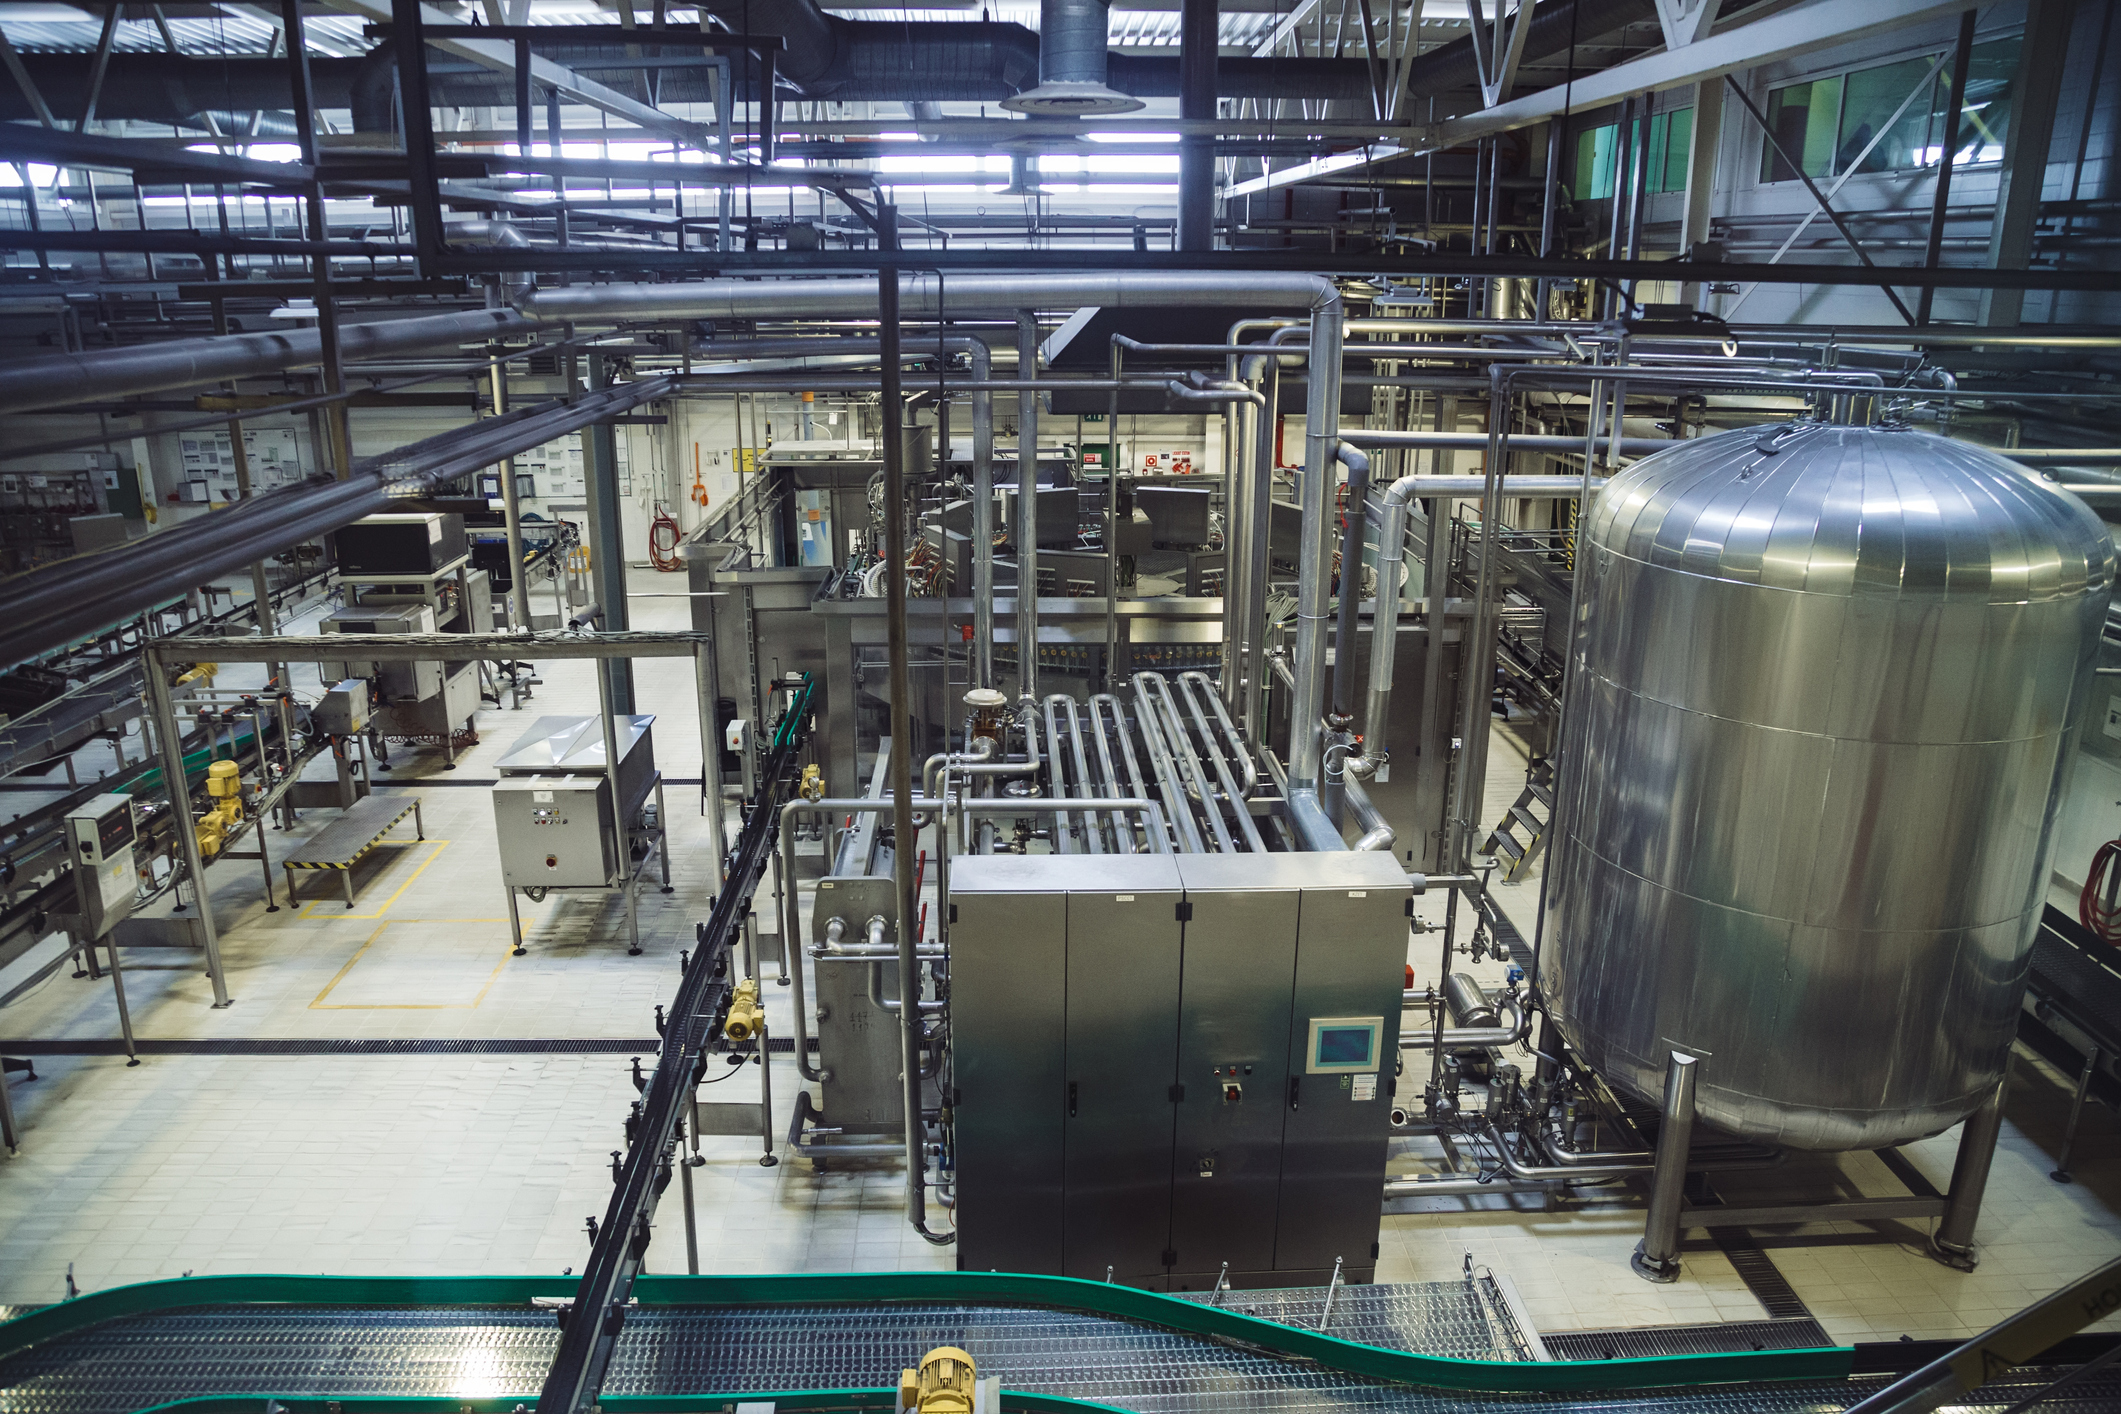 Modern brewery production line. Large vat for beer fermentation and maturation, pipelines and filtration system